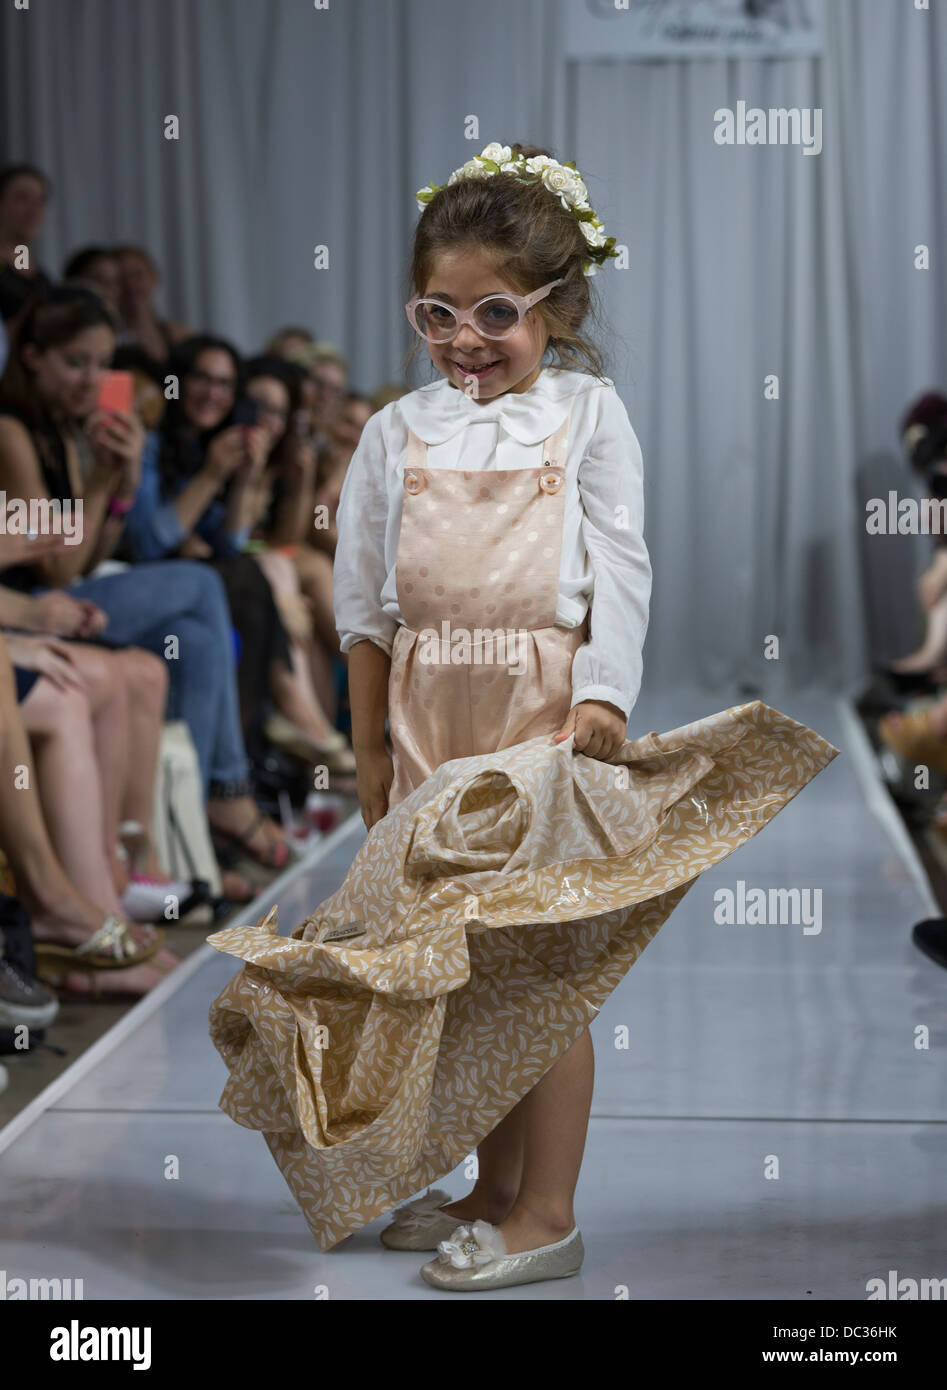 Best Dressed Mini Guests: The 10 Most Stylish Kids At Fashion Week